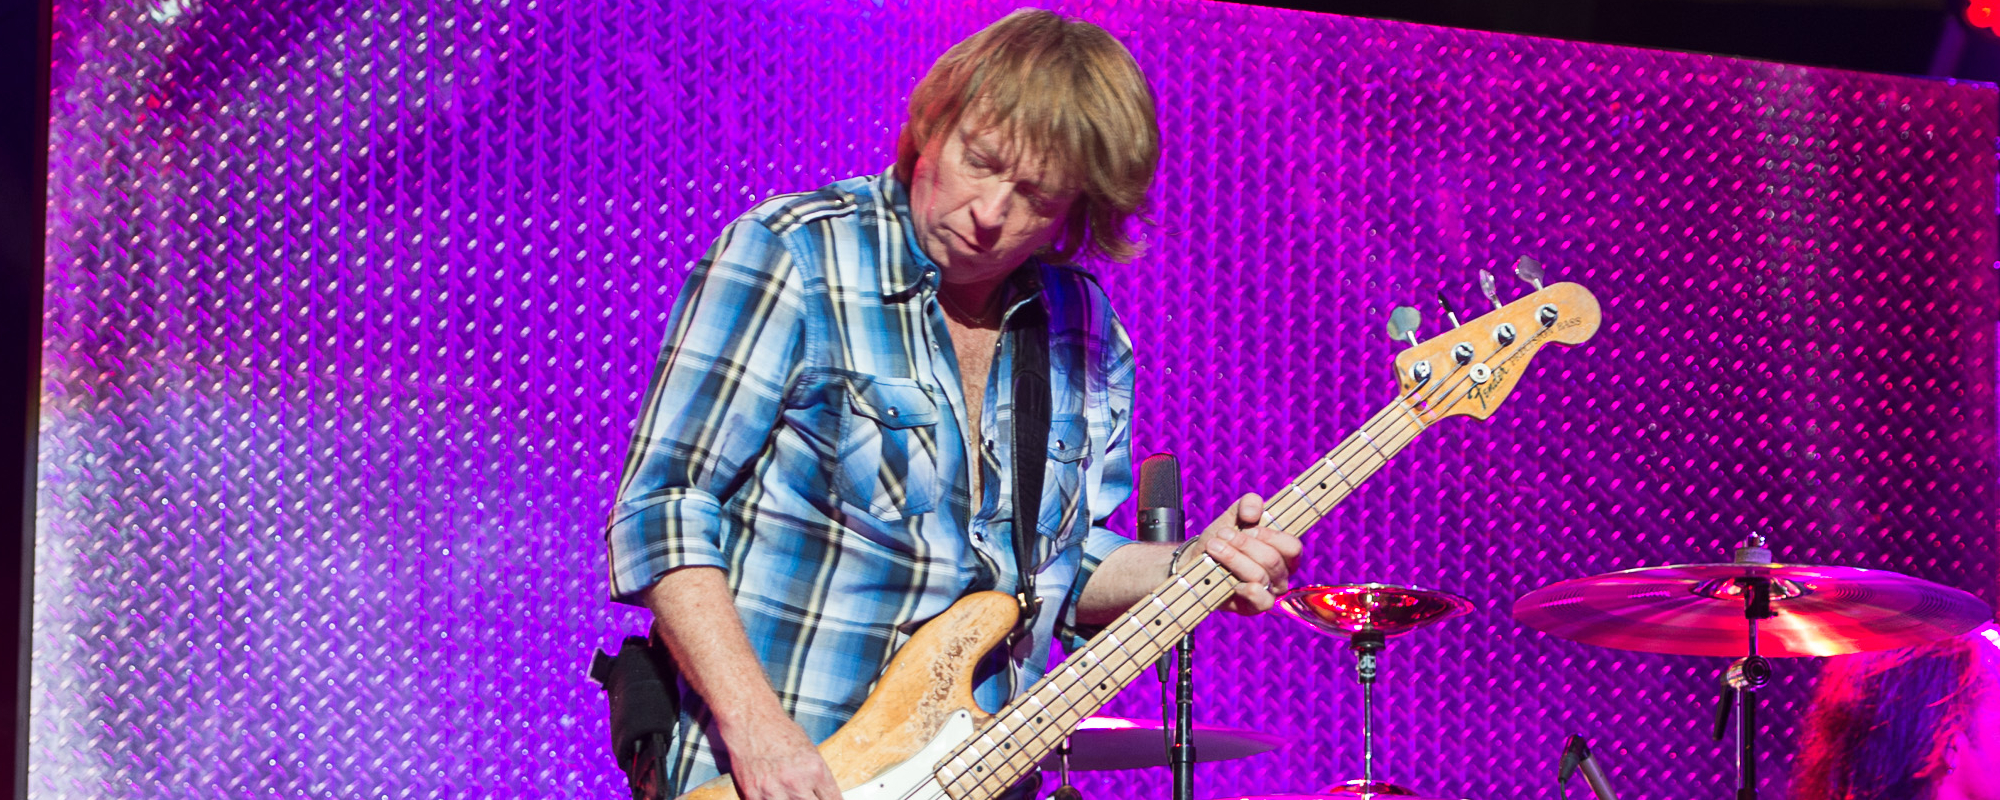 Foreigner Jeff Pilson Gives Update on Back Surgery: "I Have To Be Very Careful"